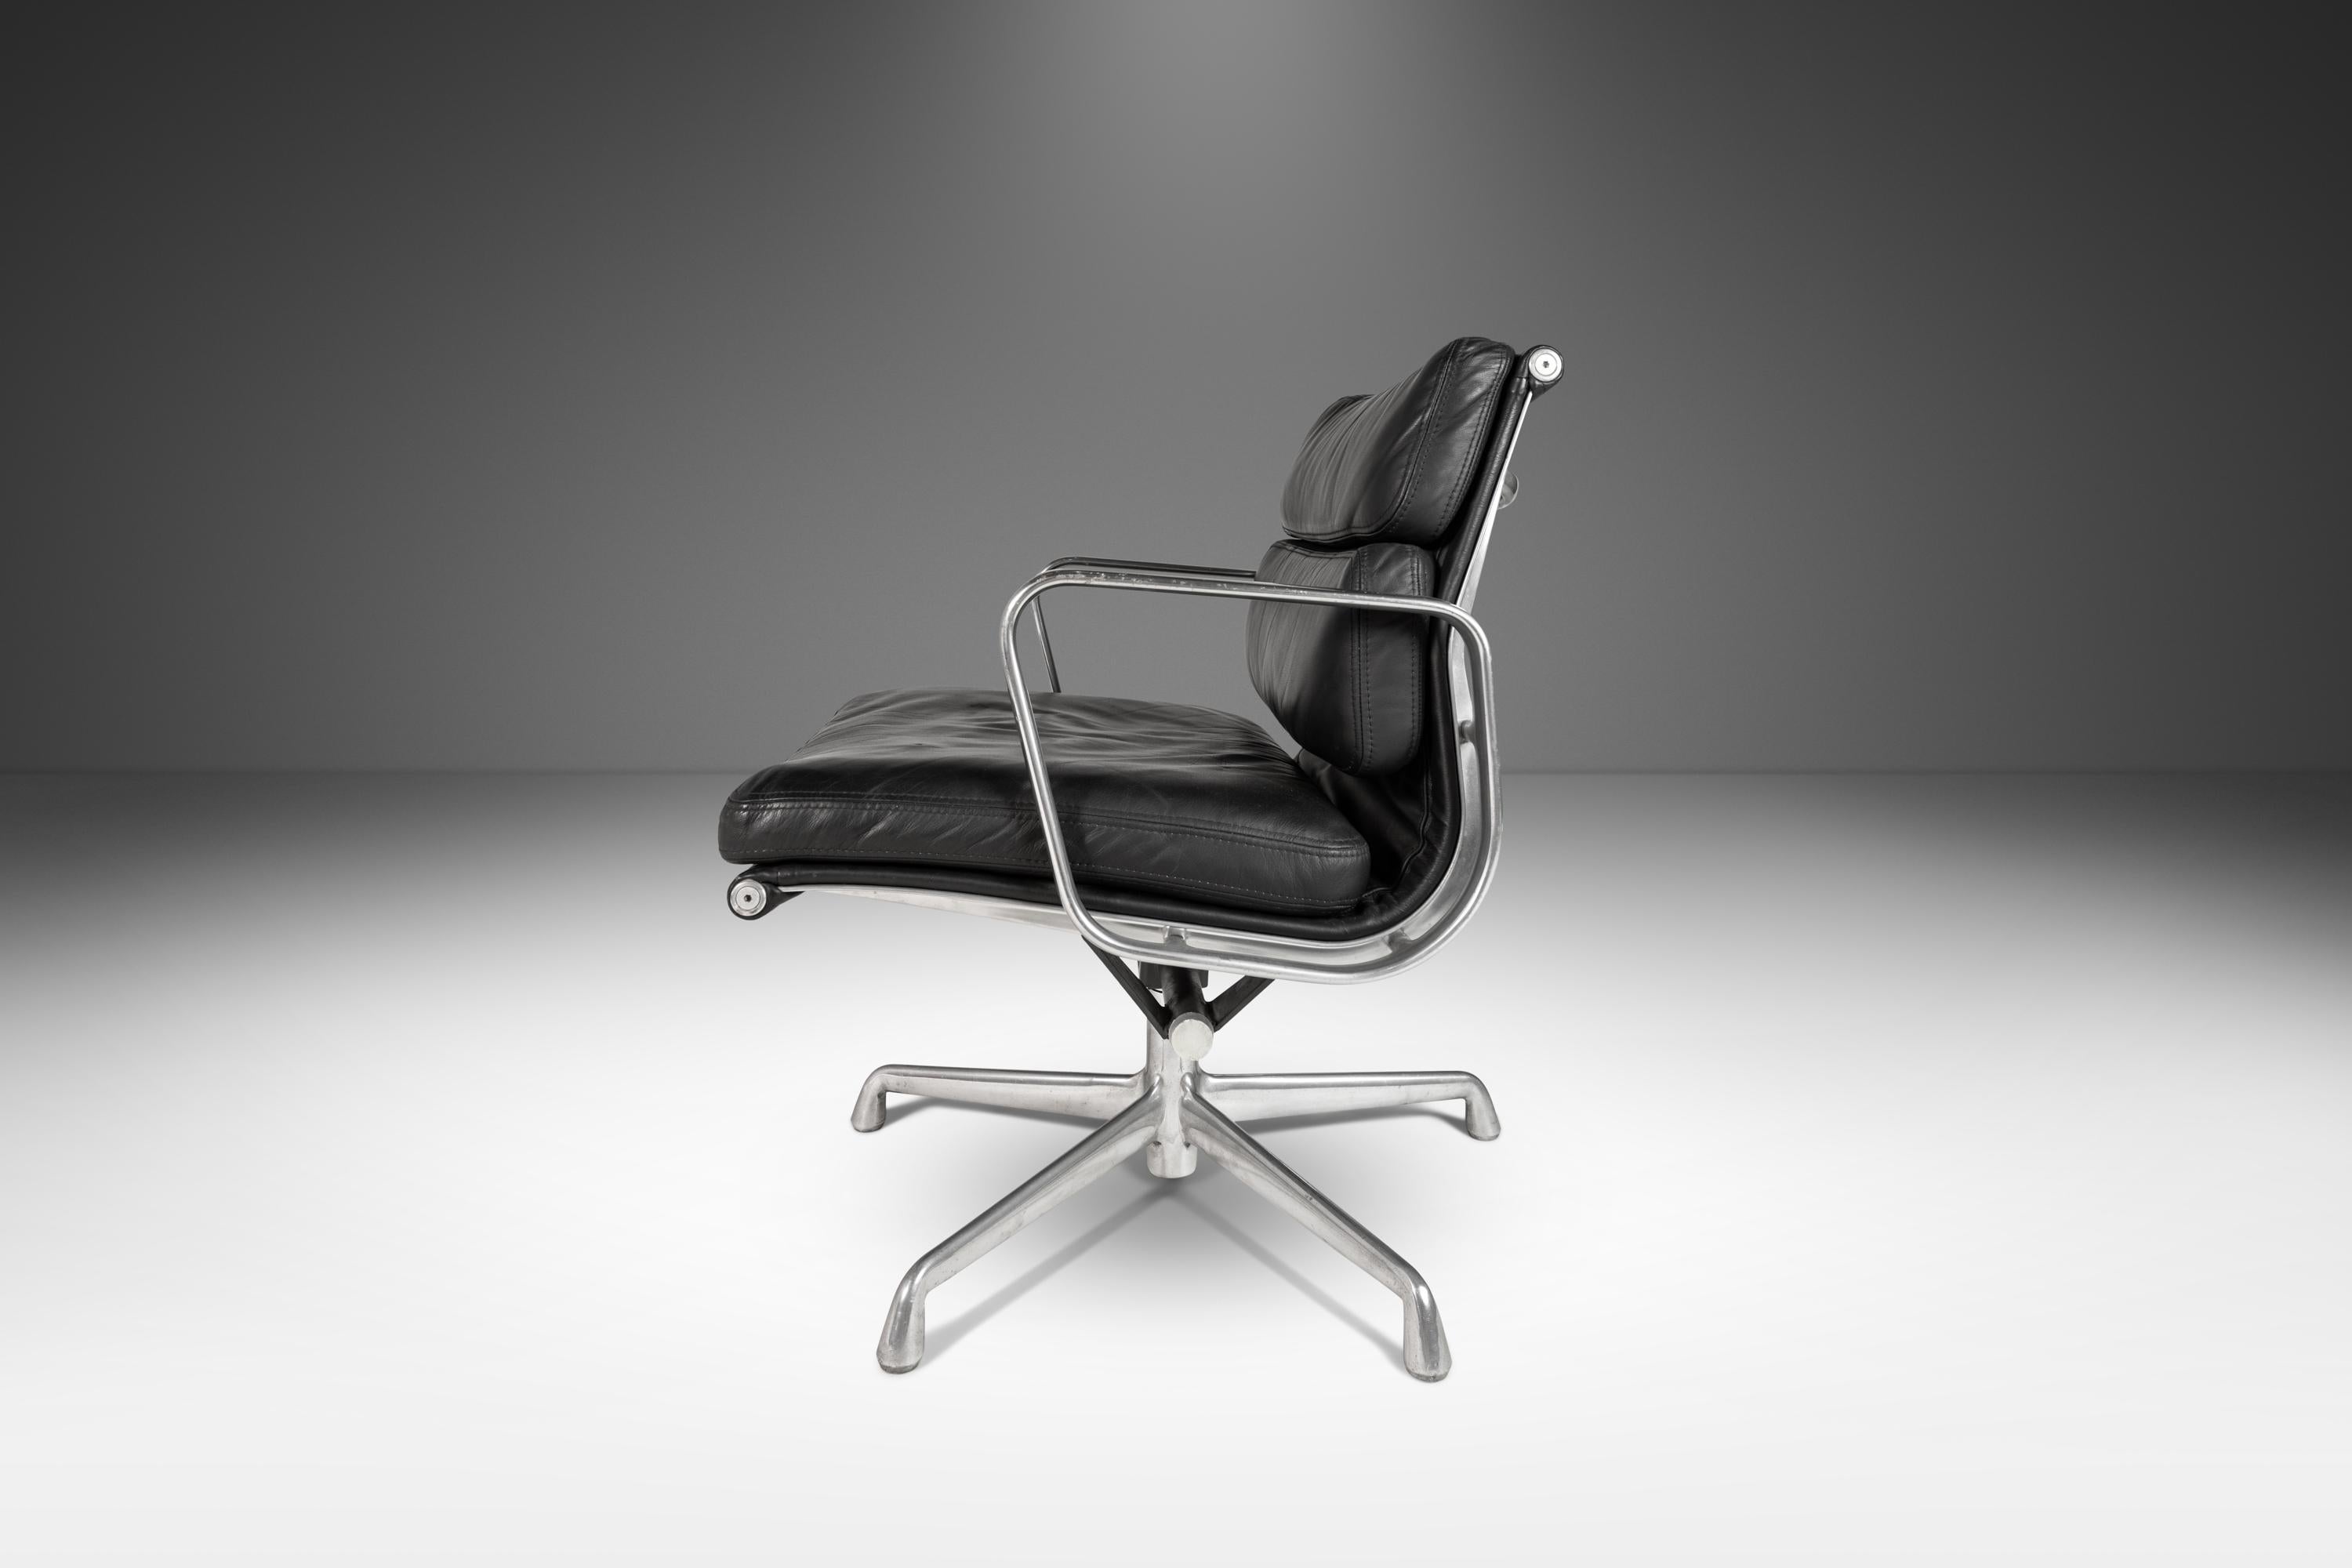 Steel Soft Pad Management Office Chair in Leather by Eames for Herman Miller, c. 1995